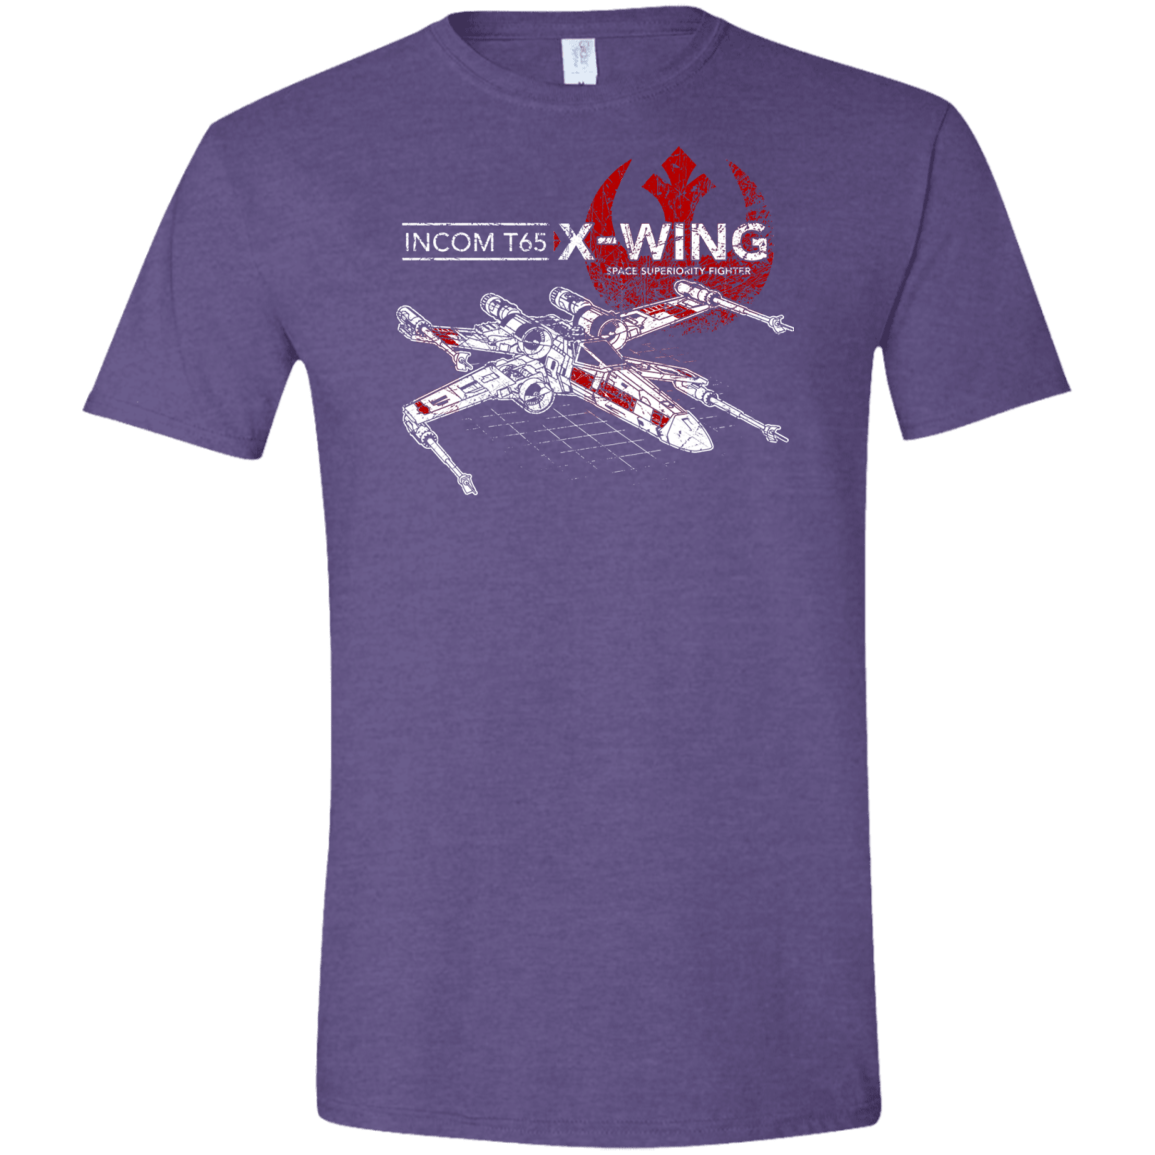 T-Shirts Heather Purple / S T-65 X-Wing Men's Semi-Fitted Softstyle